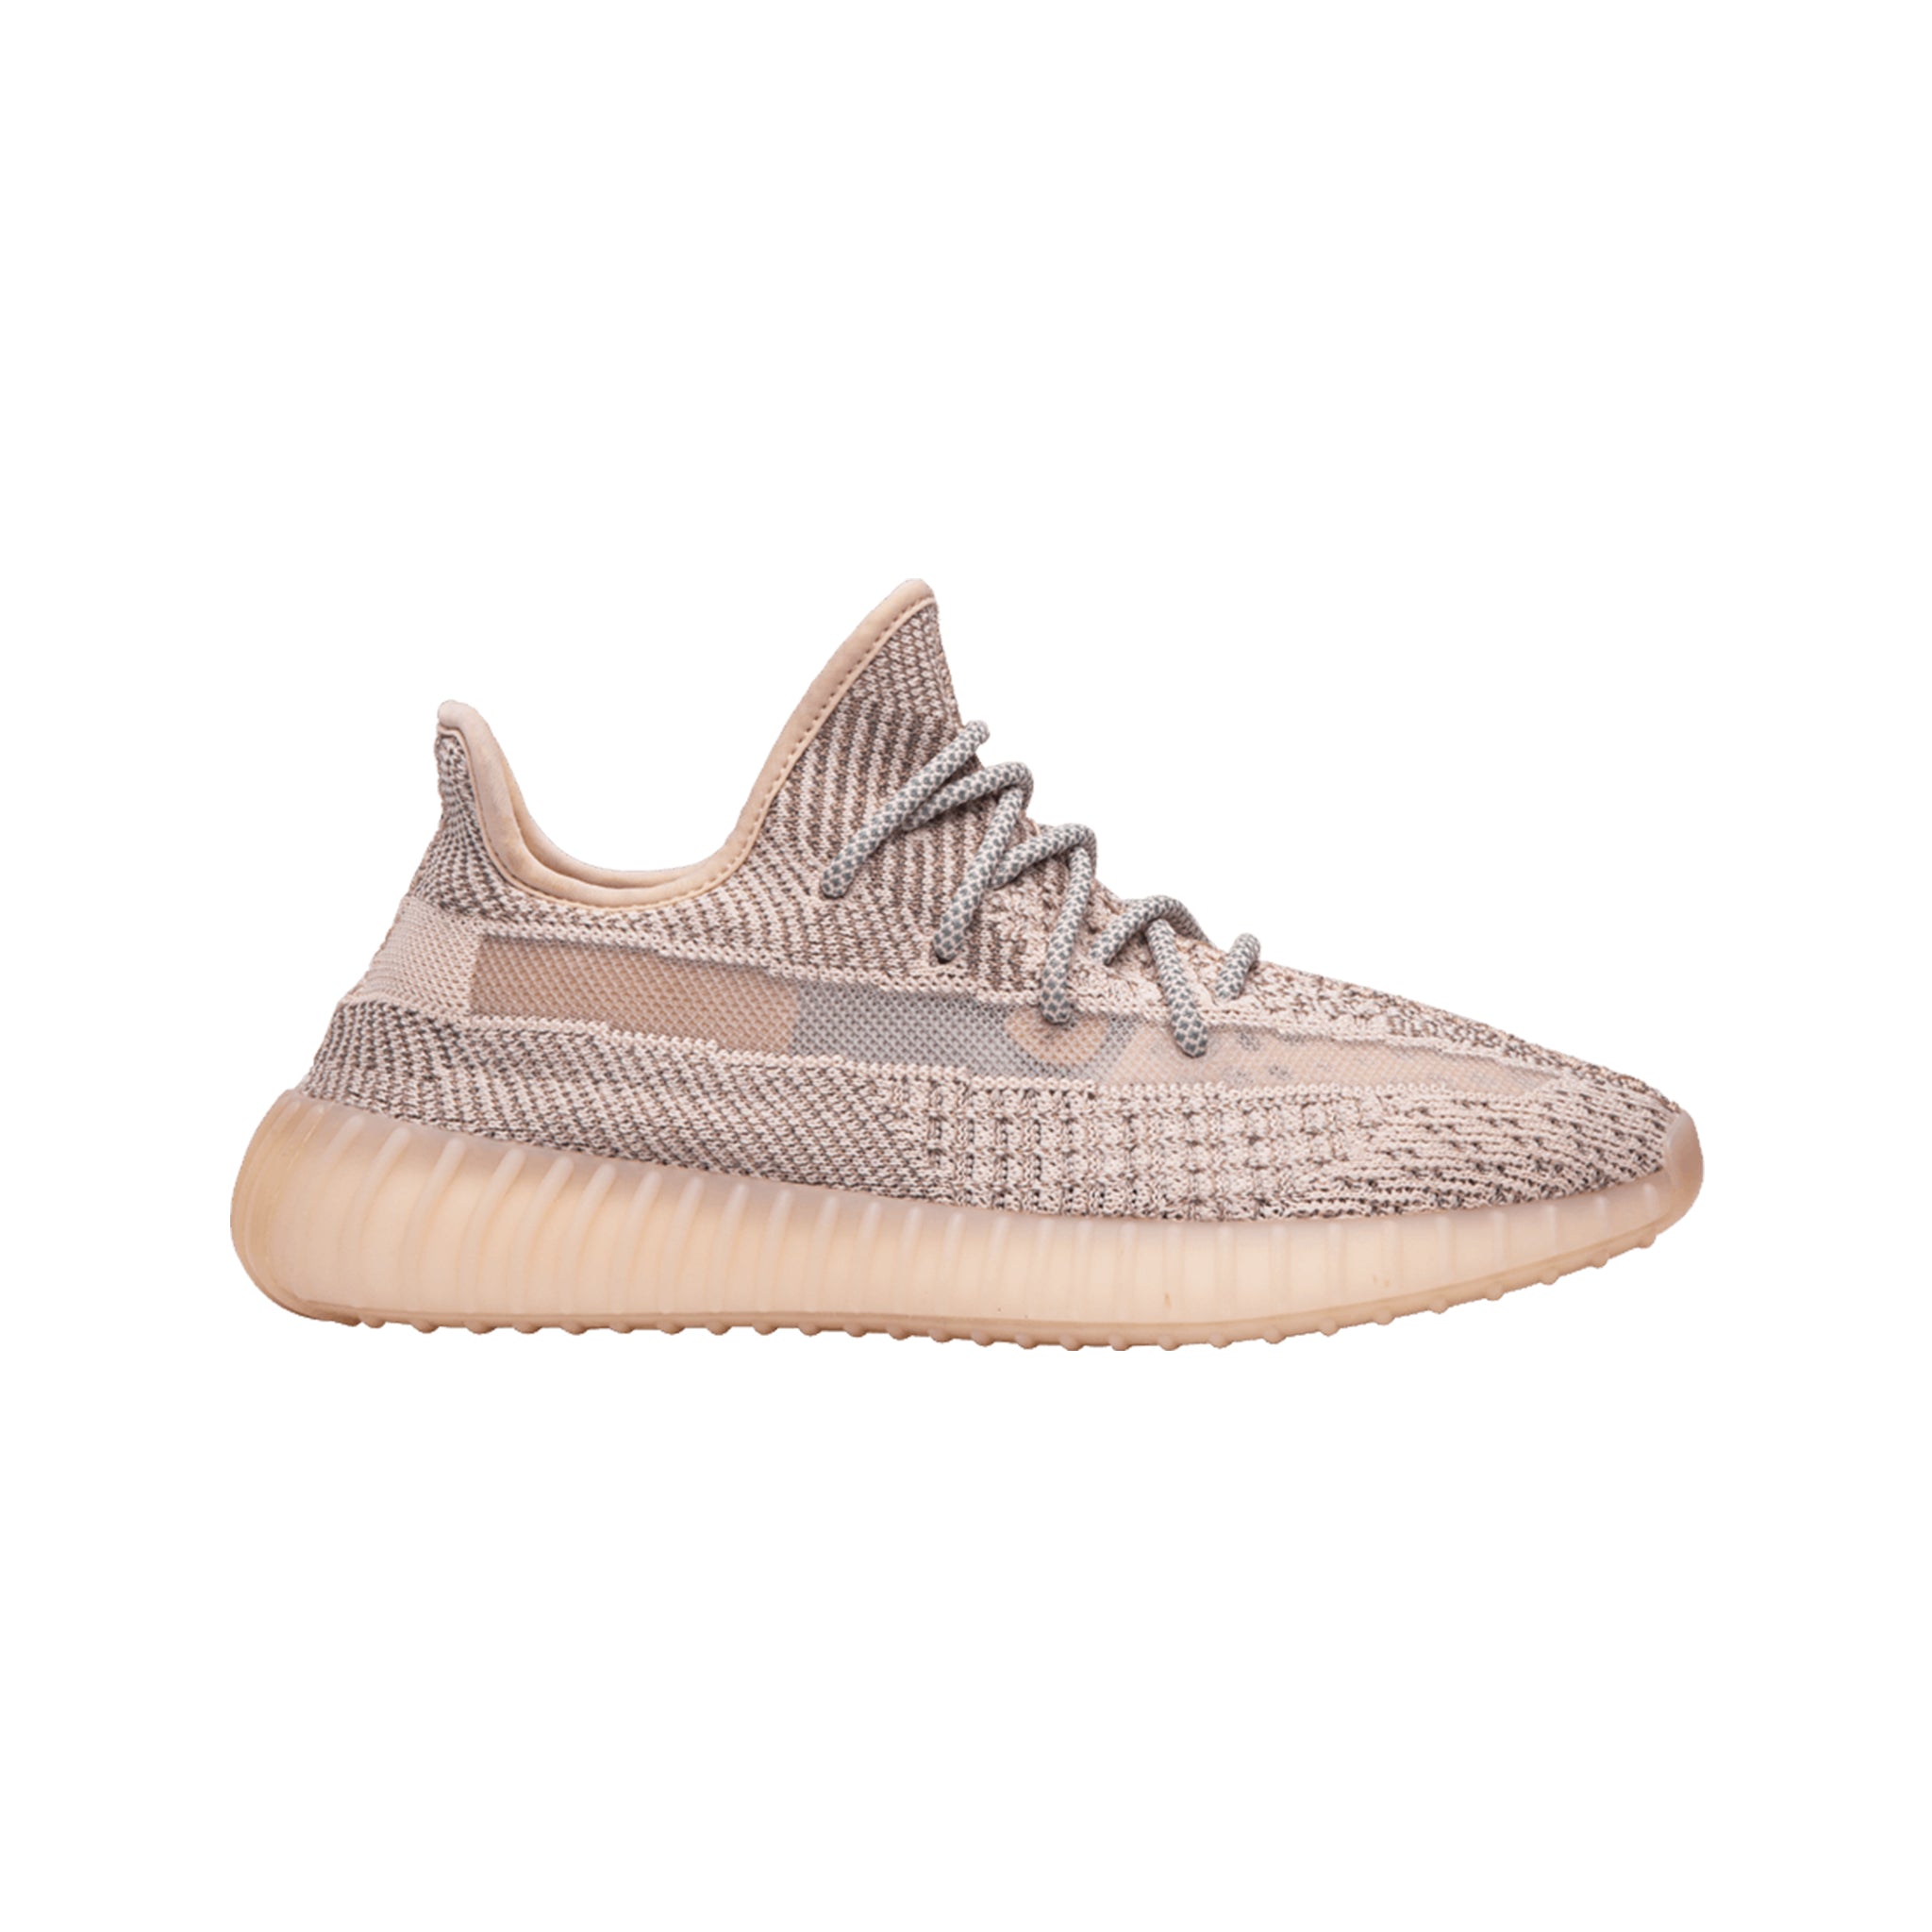 ADIDAS YEEZY BOOST 350 V2 SYNTH (REFLECTIVE)